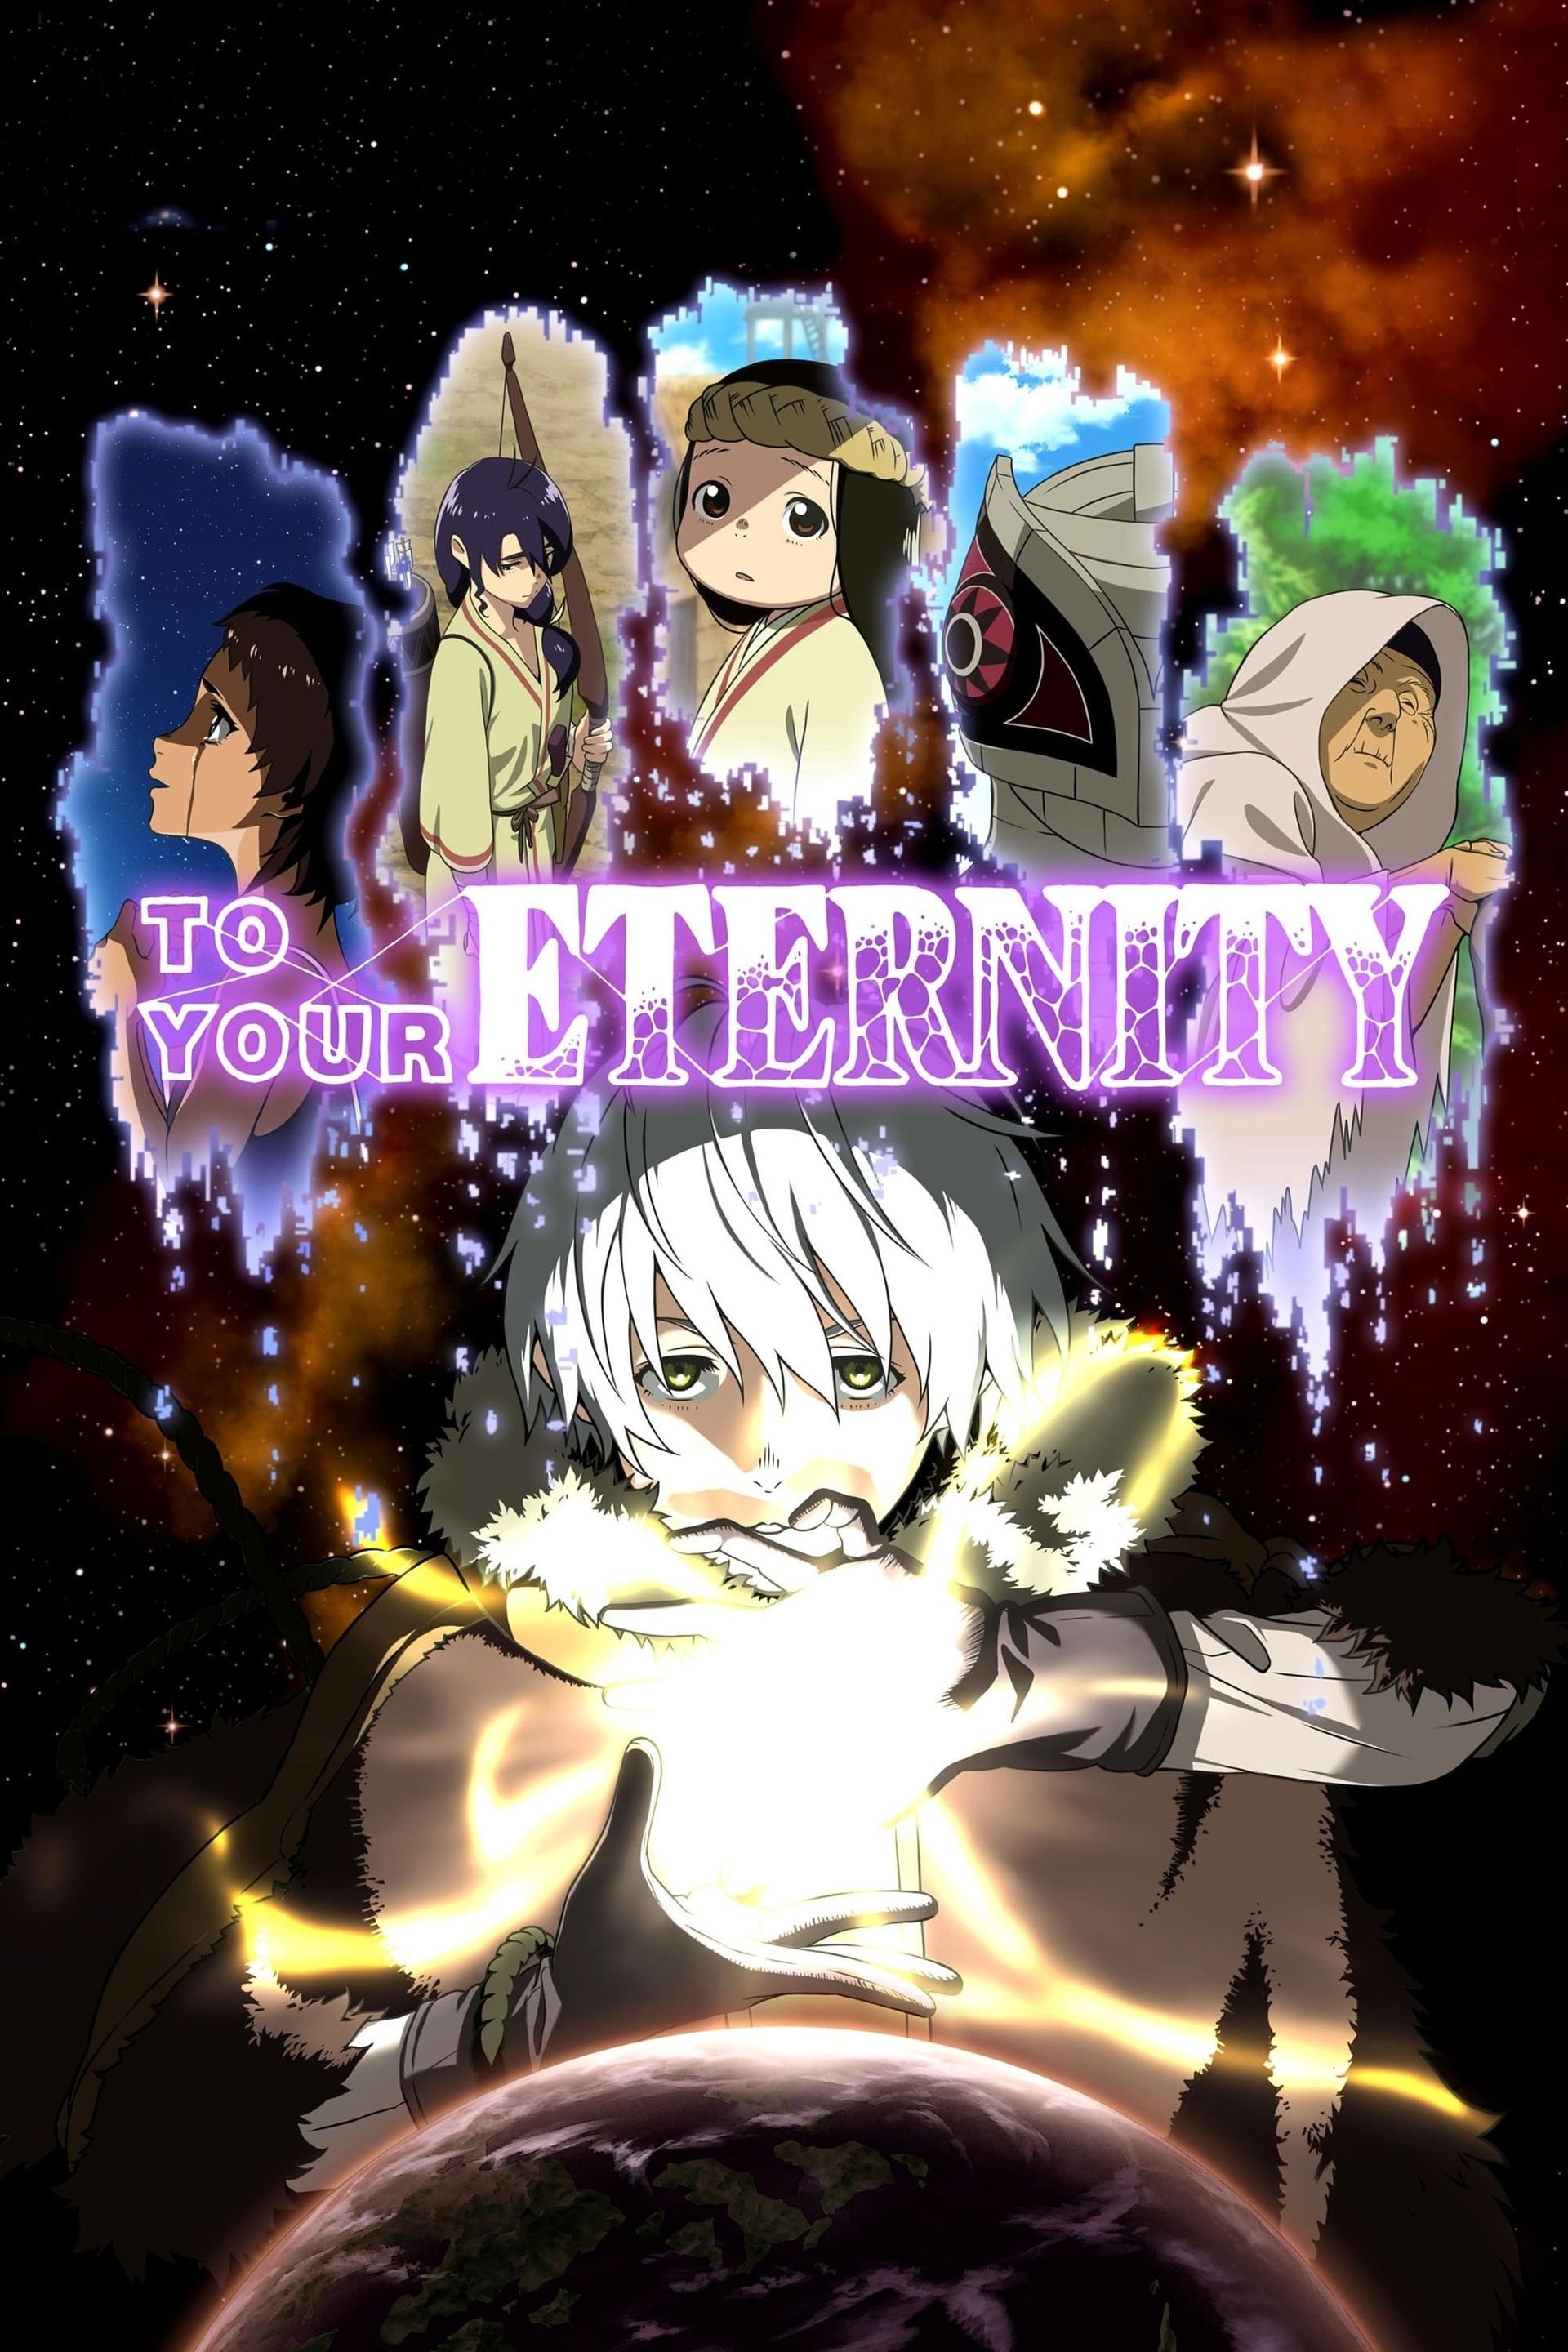 Watch “To Your Eternity” Anime Online For Free [All Episodes